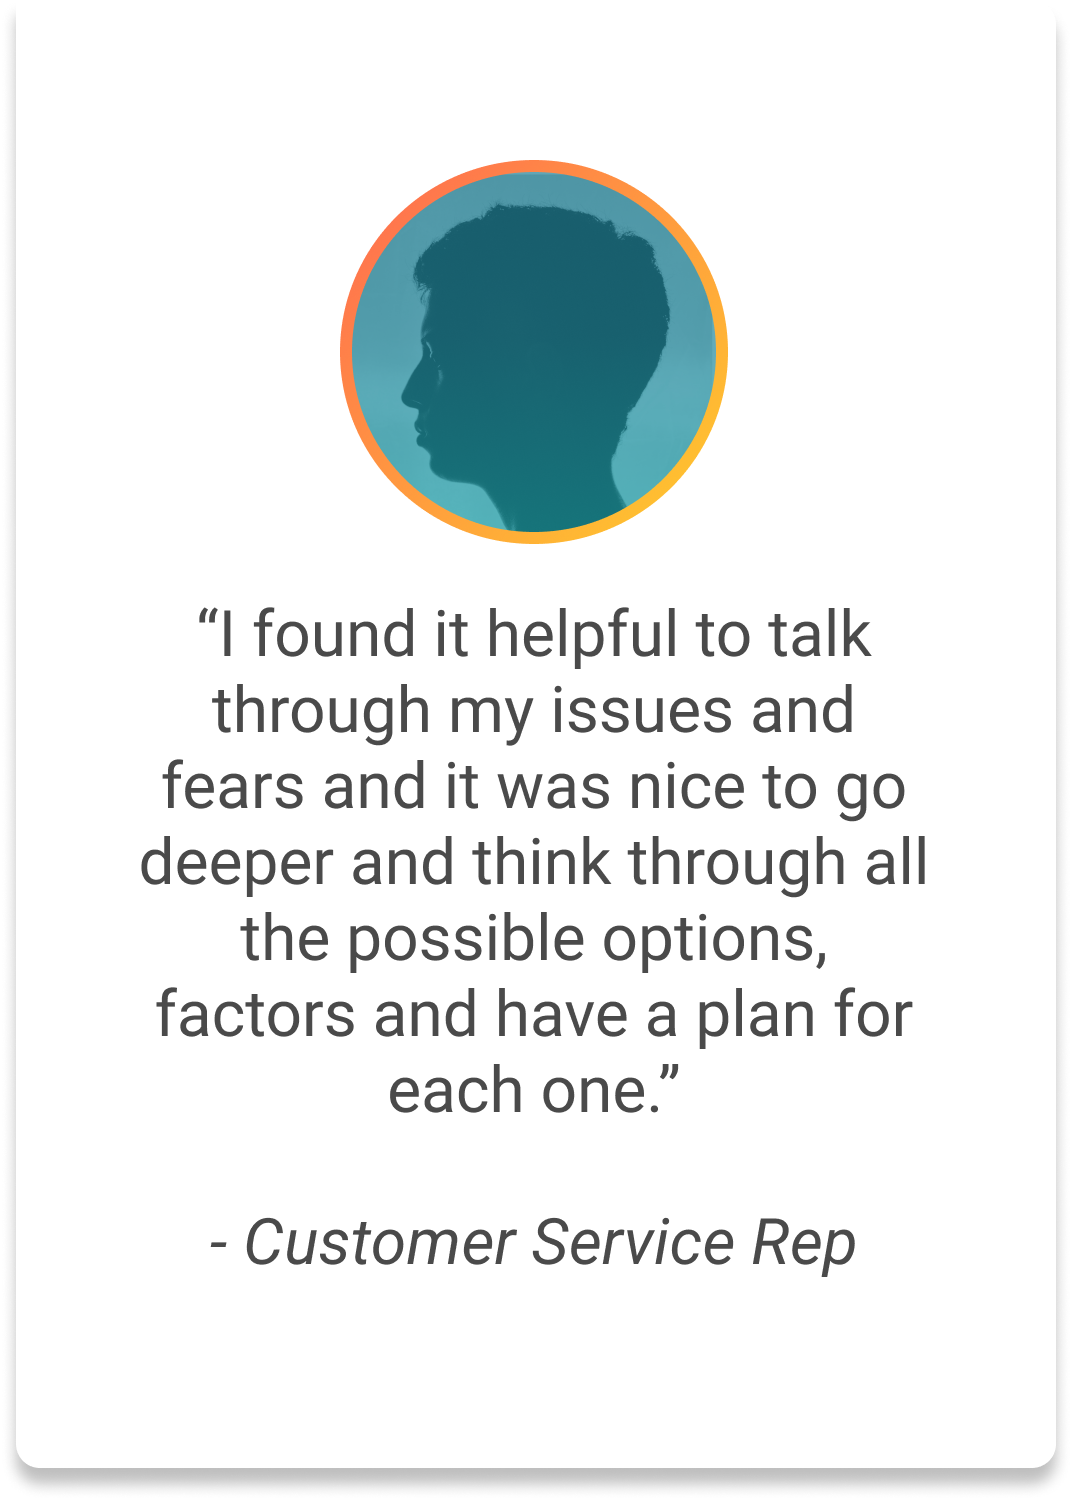 Employee testimonial on what is an ombuds and how the ombuds service benefited them.